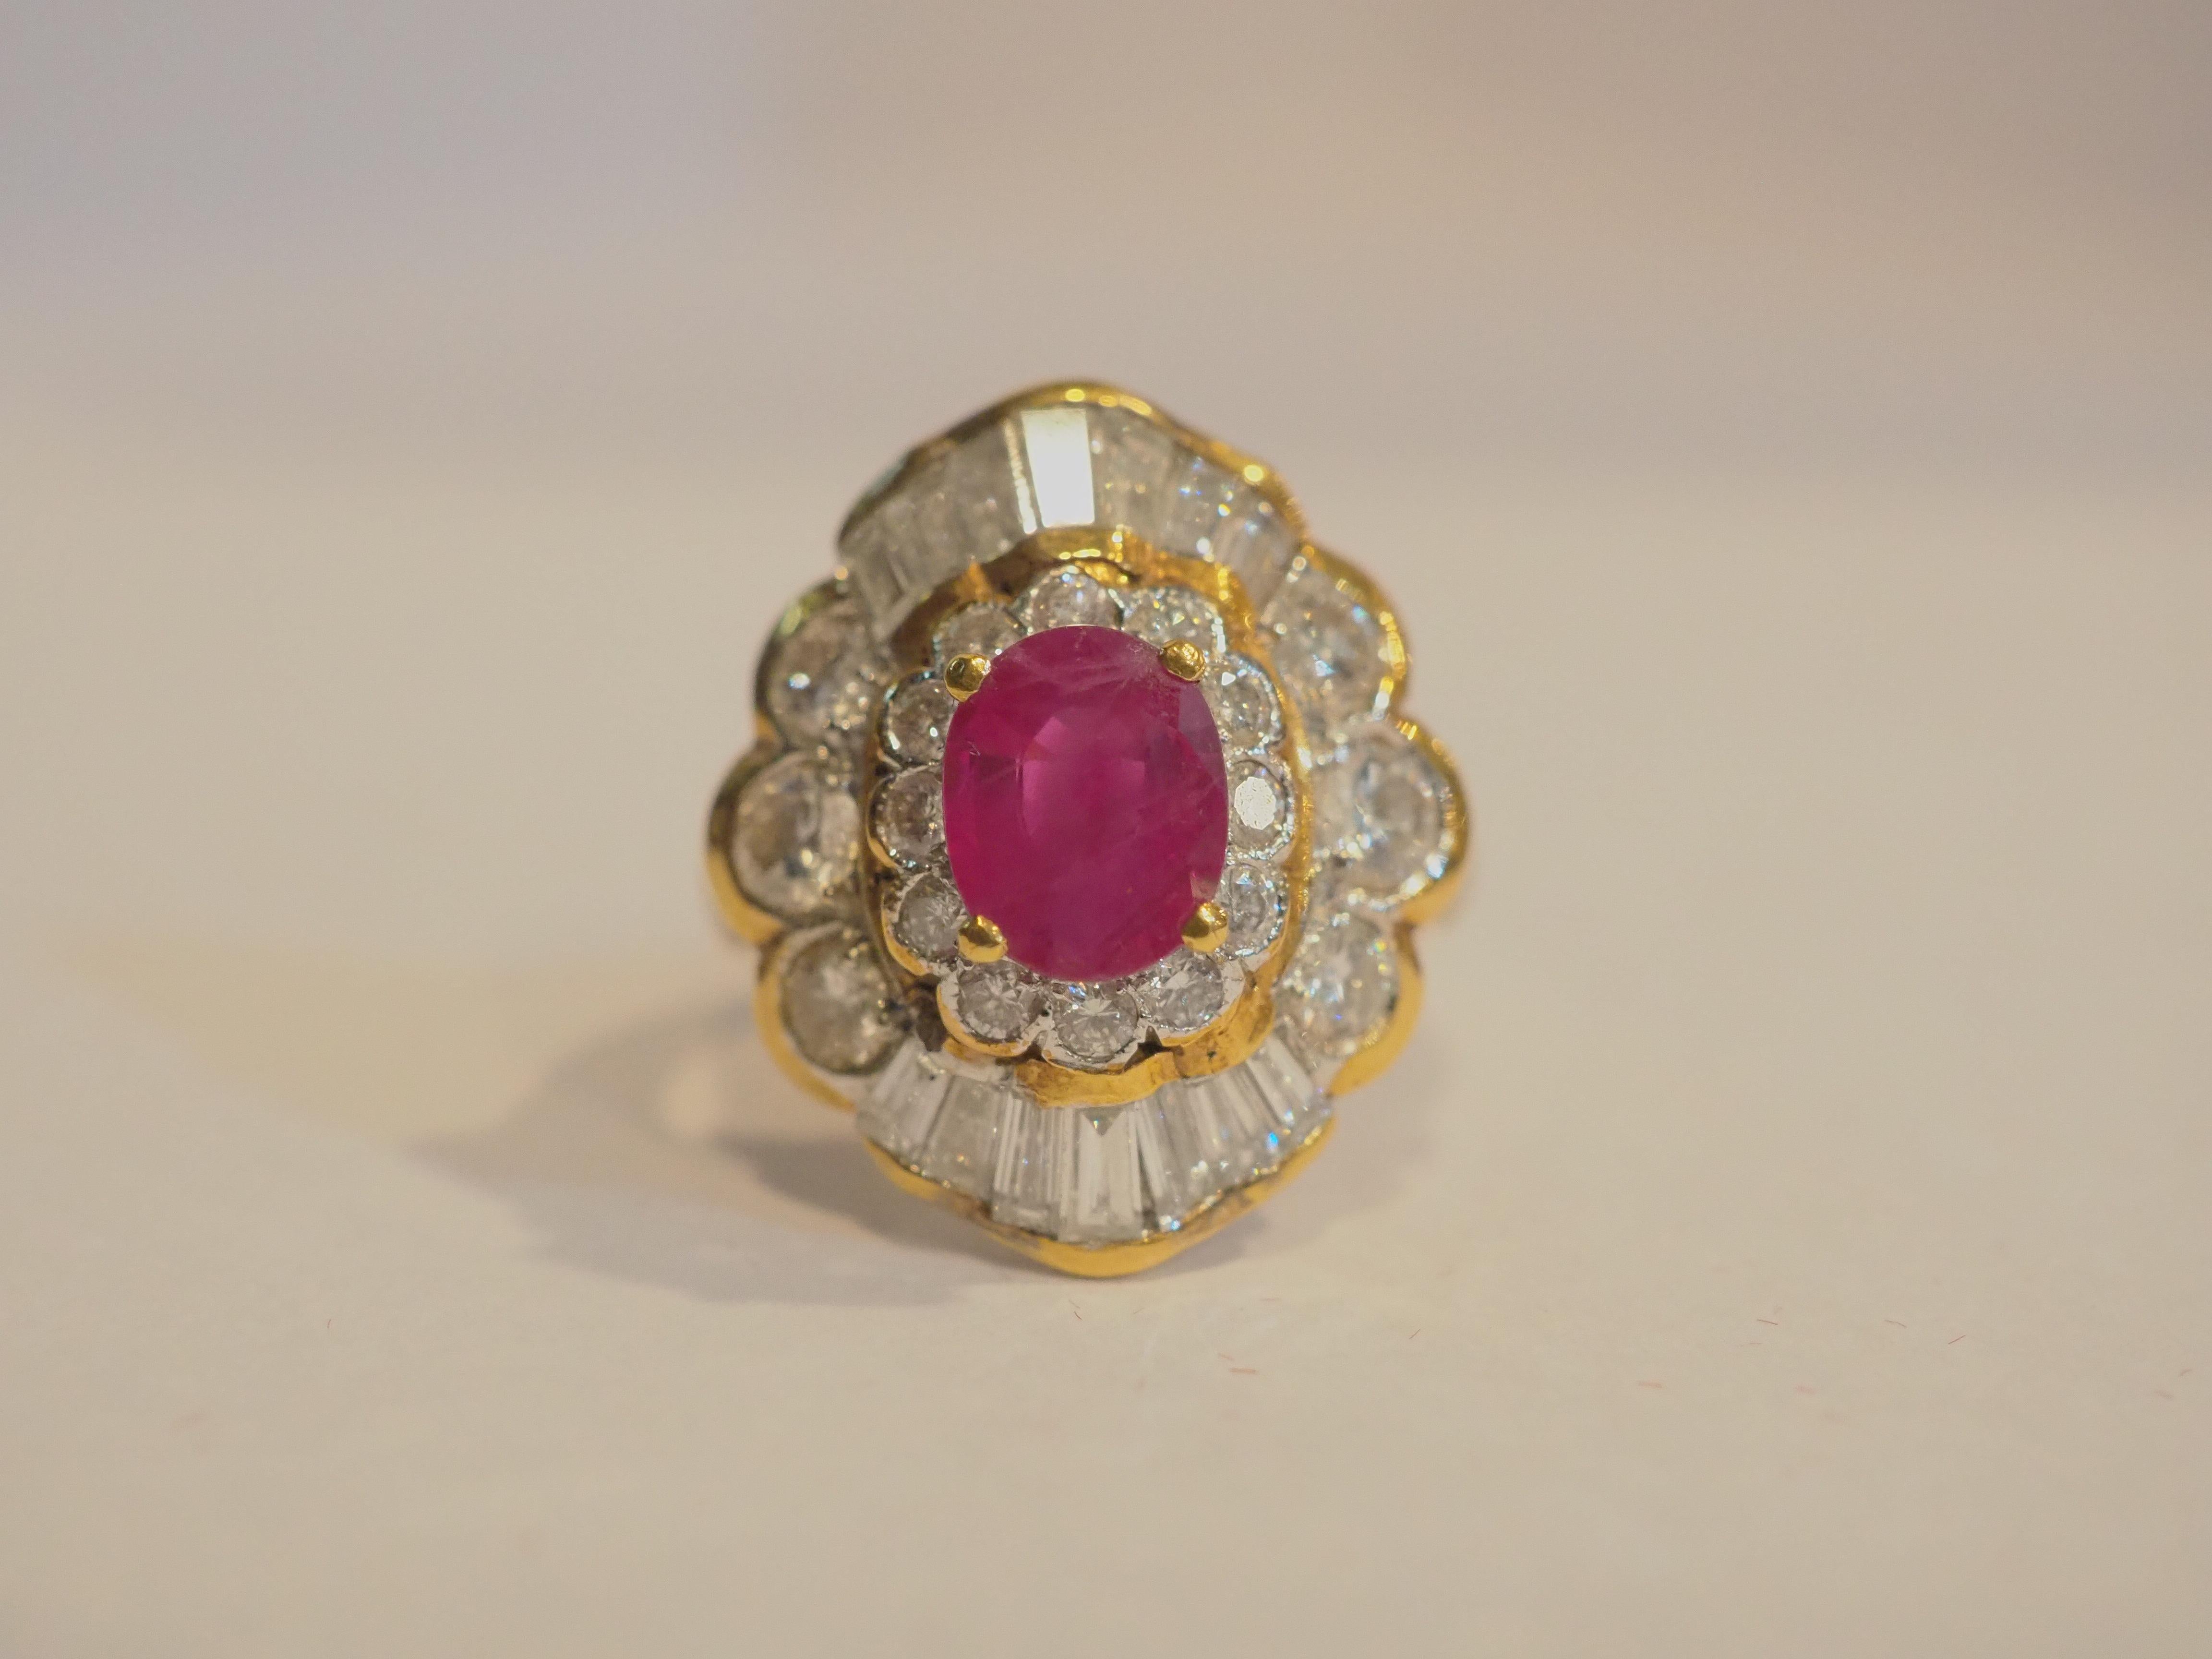 This beautiful and vintage cocktail ring boasts a lovely oval ruby at the center! The ruby is an oval cut and is bright with high saturation of color and with natural inclusions. There are numerous tapered baguette and round diamonds accenting the